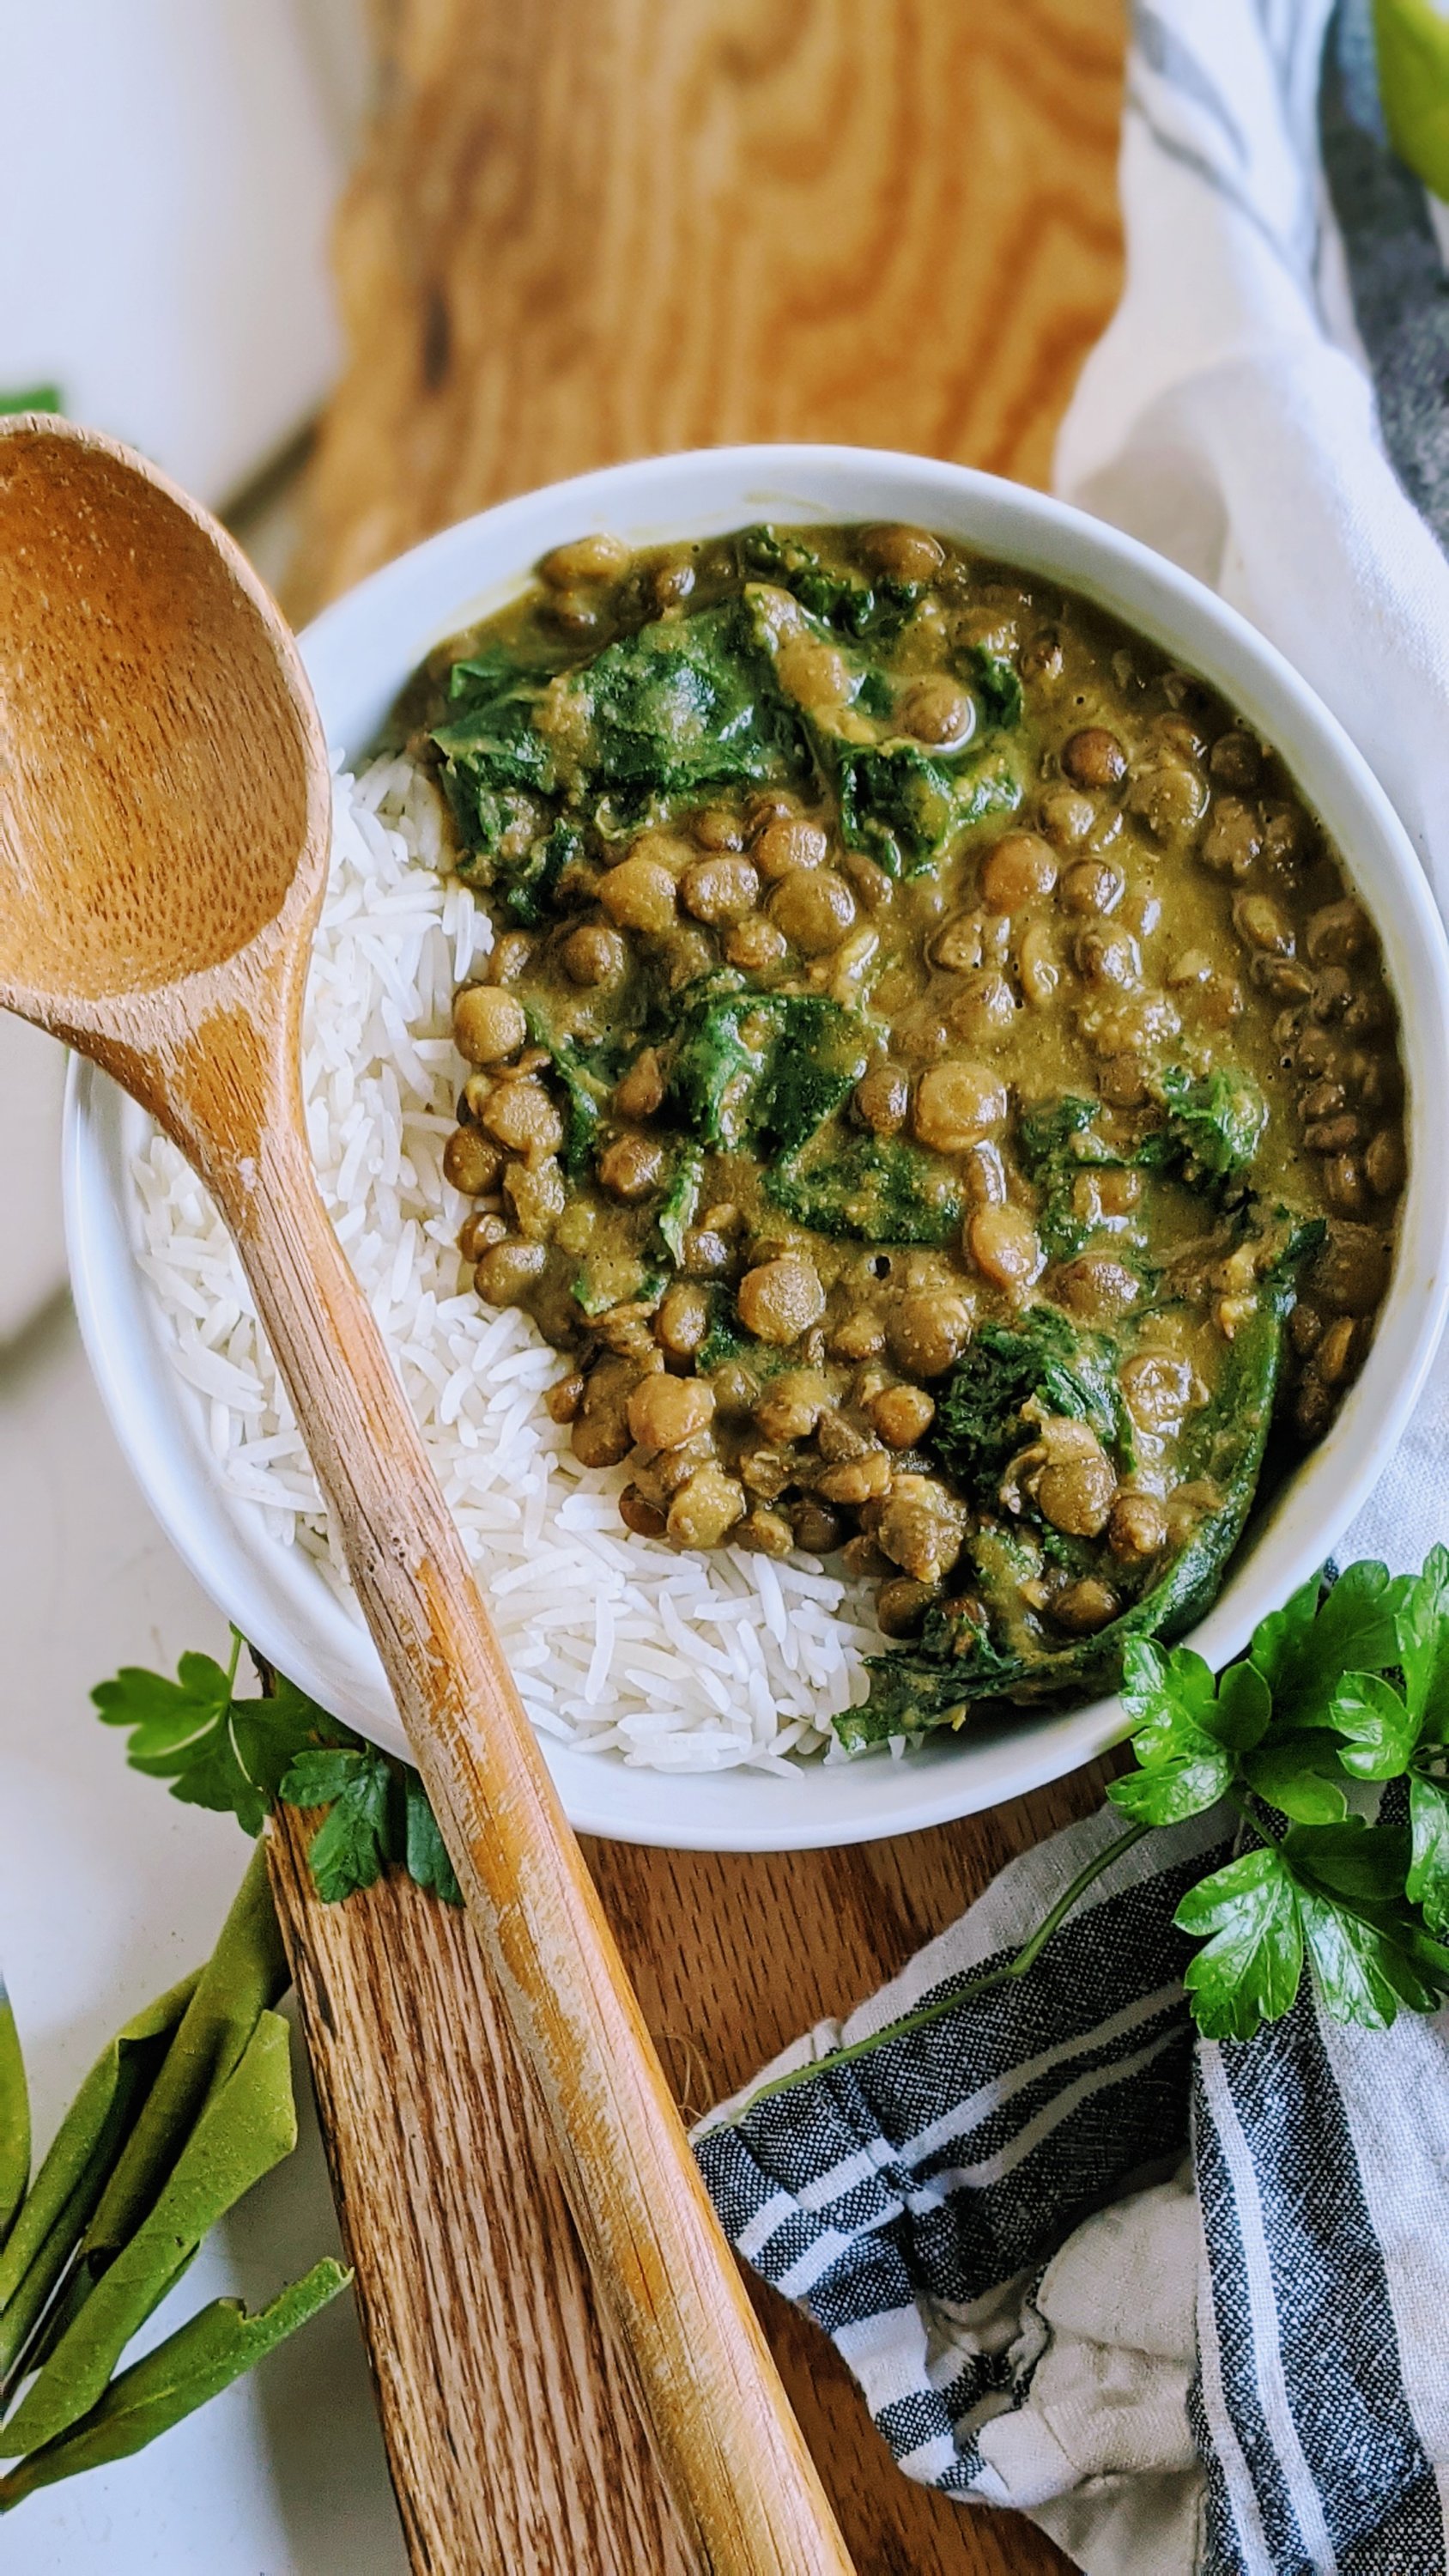 vegan coconut curry lentils recipe healhy high protein vegetarian meatless veganuary recipes with green french le puy lentils healthy curry with kale